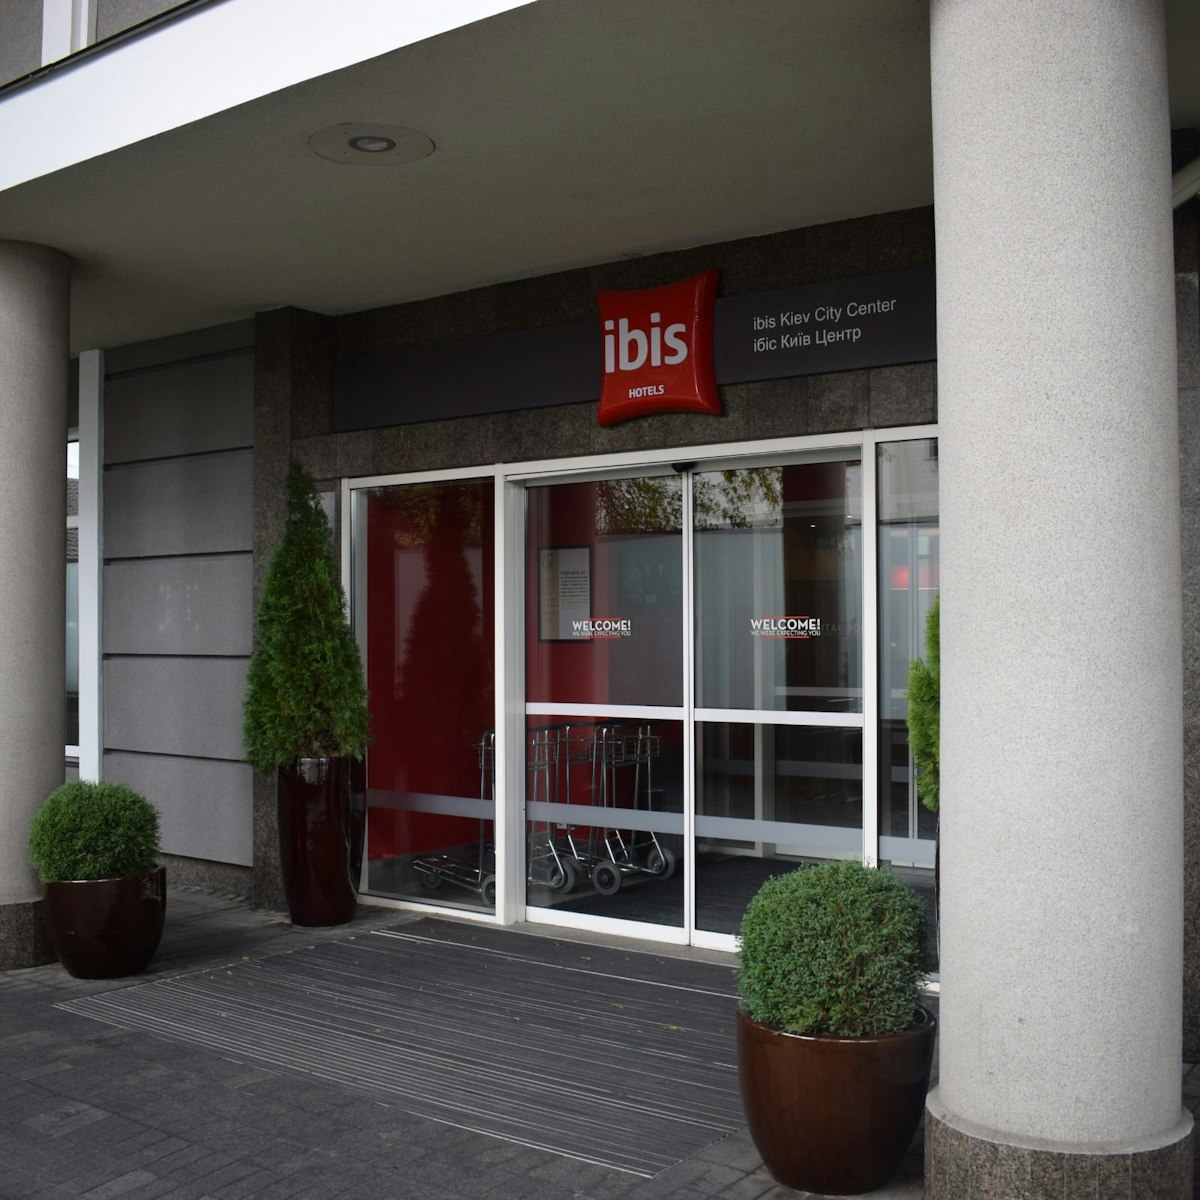 The entrance to Ibis Hotel in Kyiv